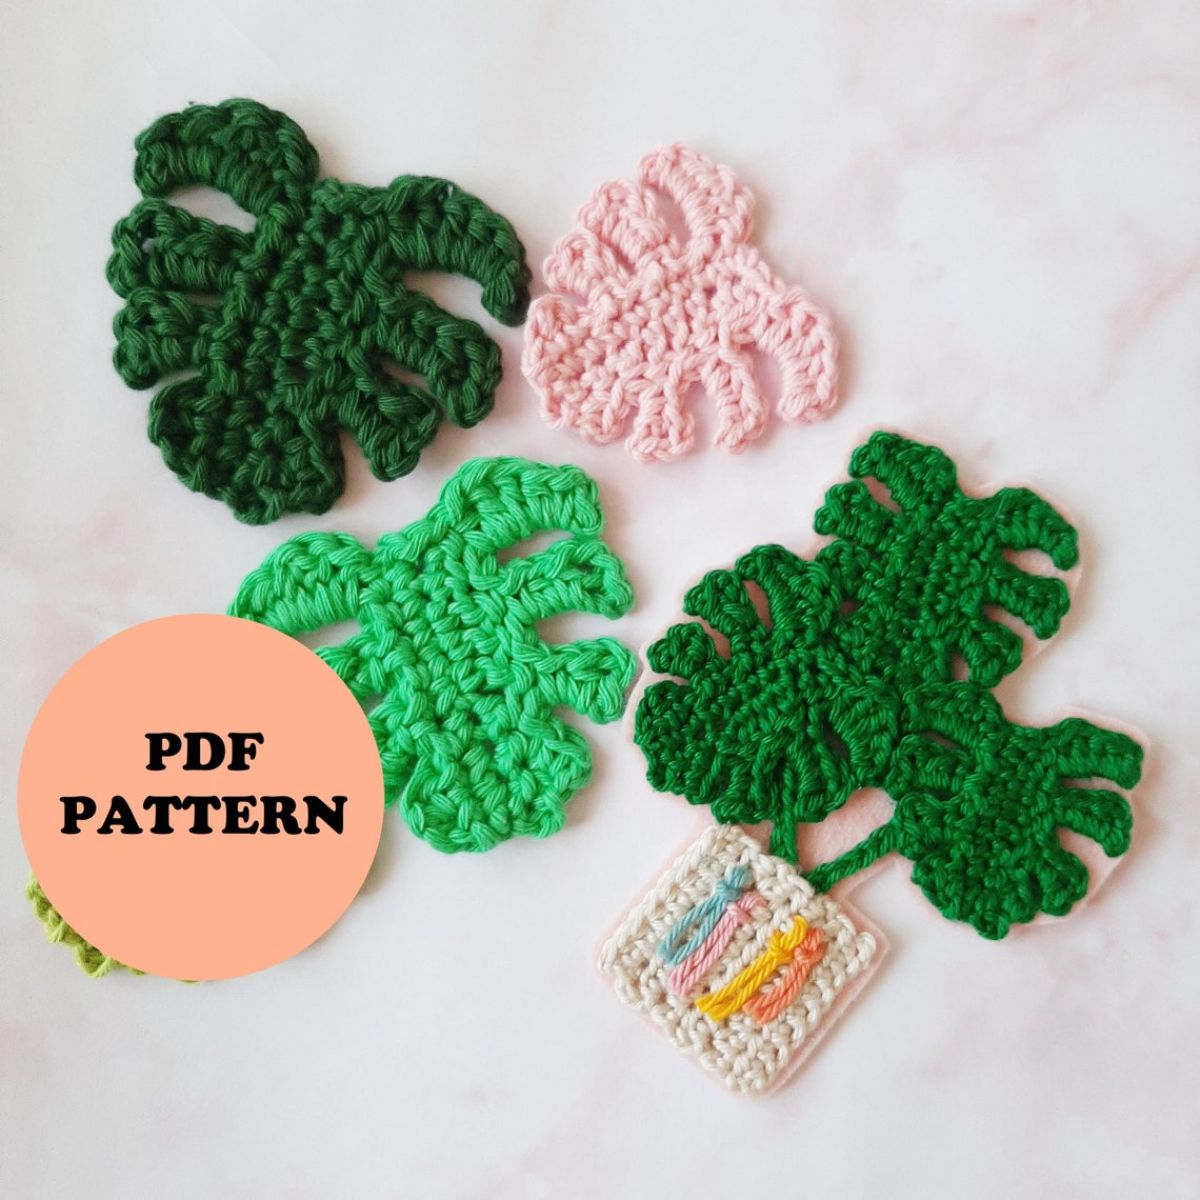 Four crochet monstera leaves in dark green, green, and pink scattered on a light background with one leaf coming out of a white pot.